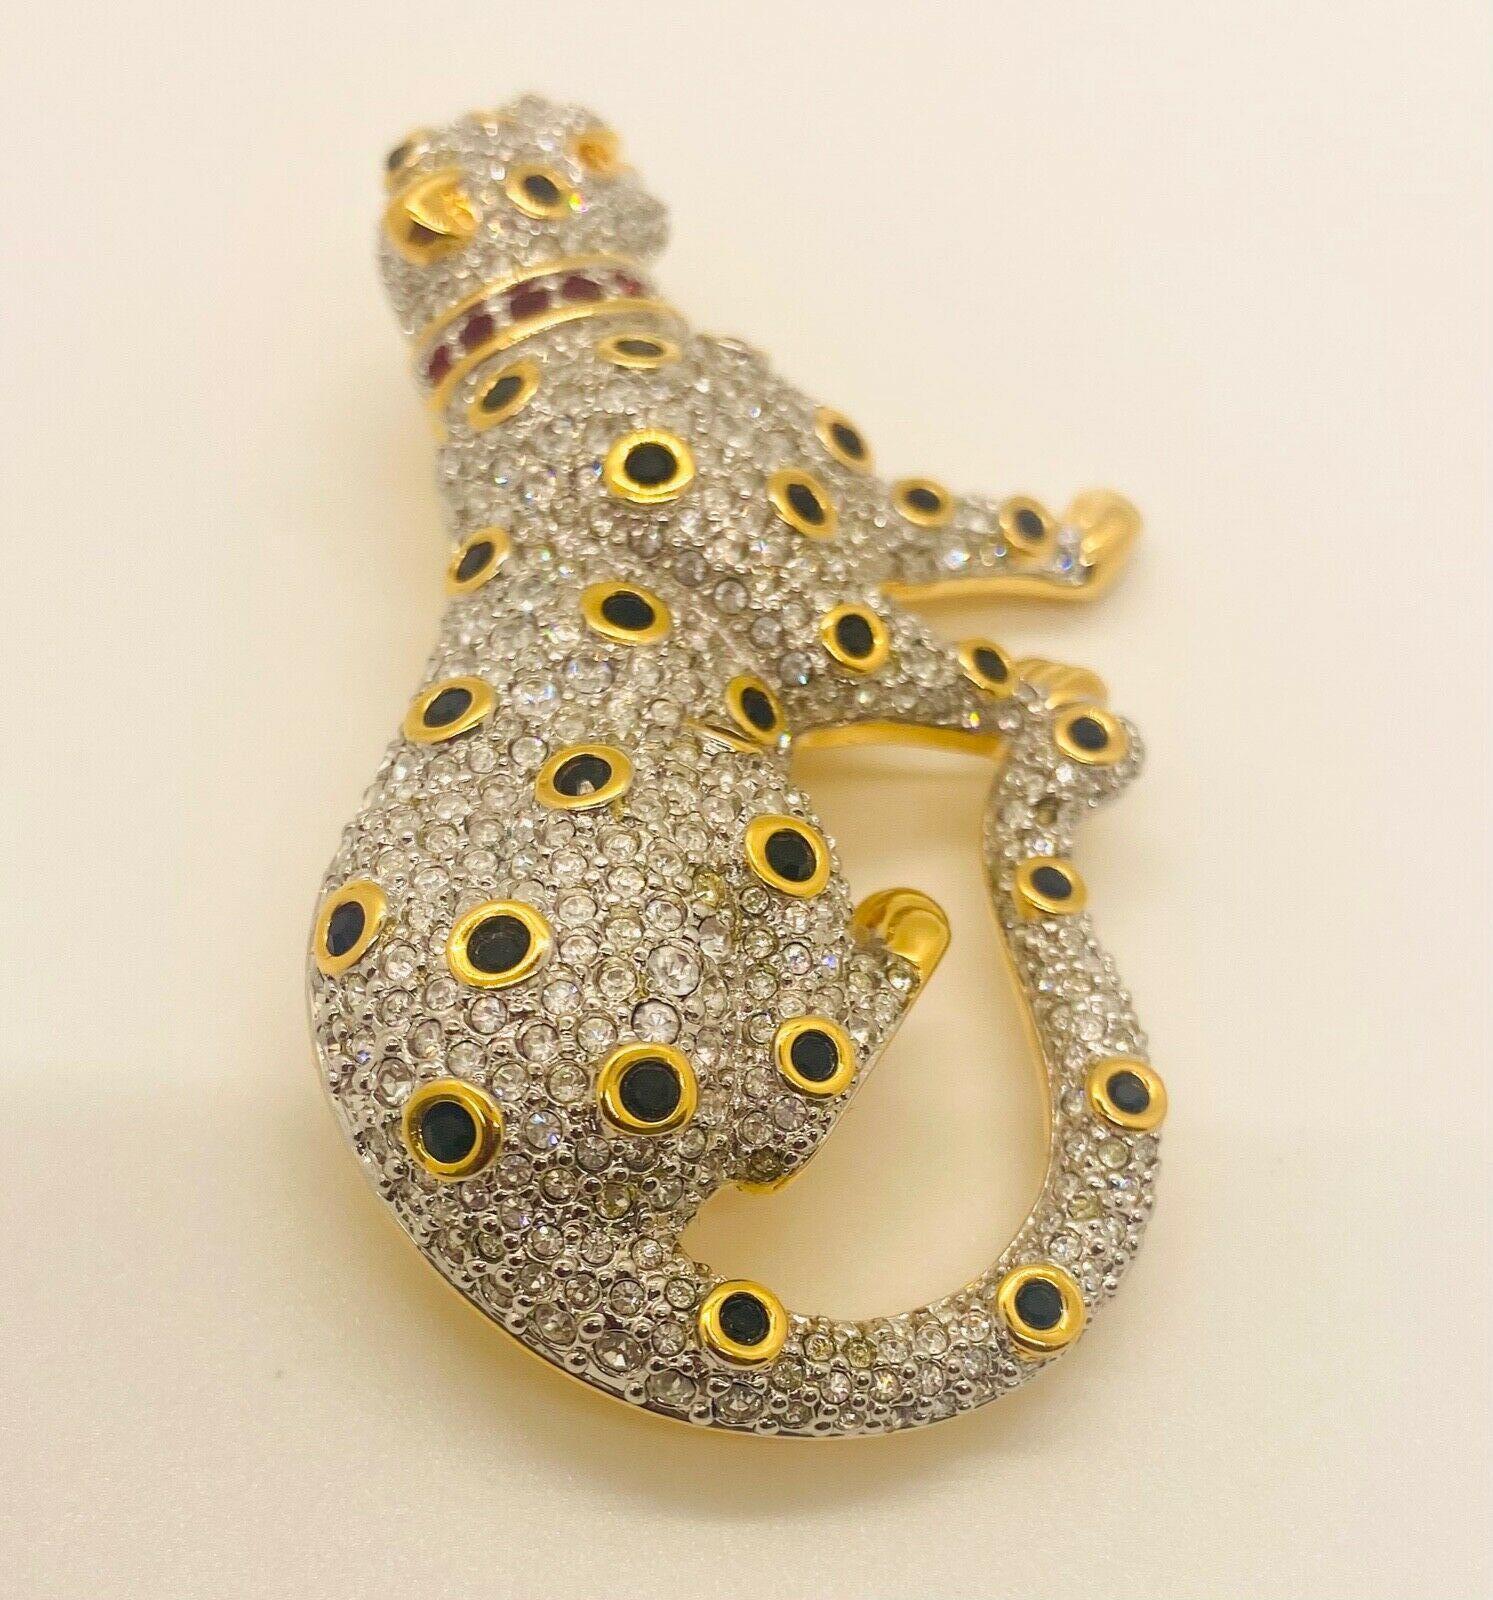 Swarovski Pave' Crystal Gold Leopard Brooch or Pin, Signed and Retired For Sale 2